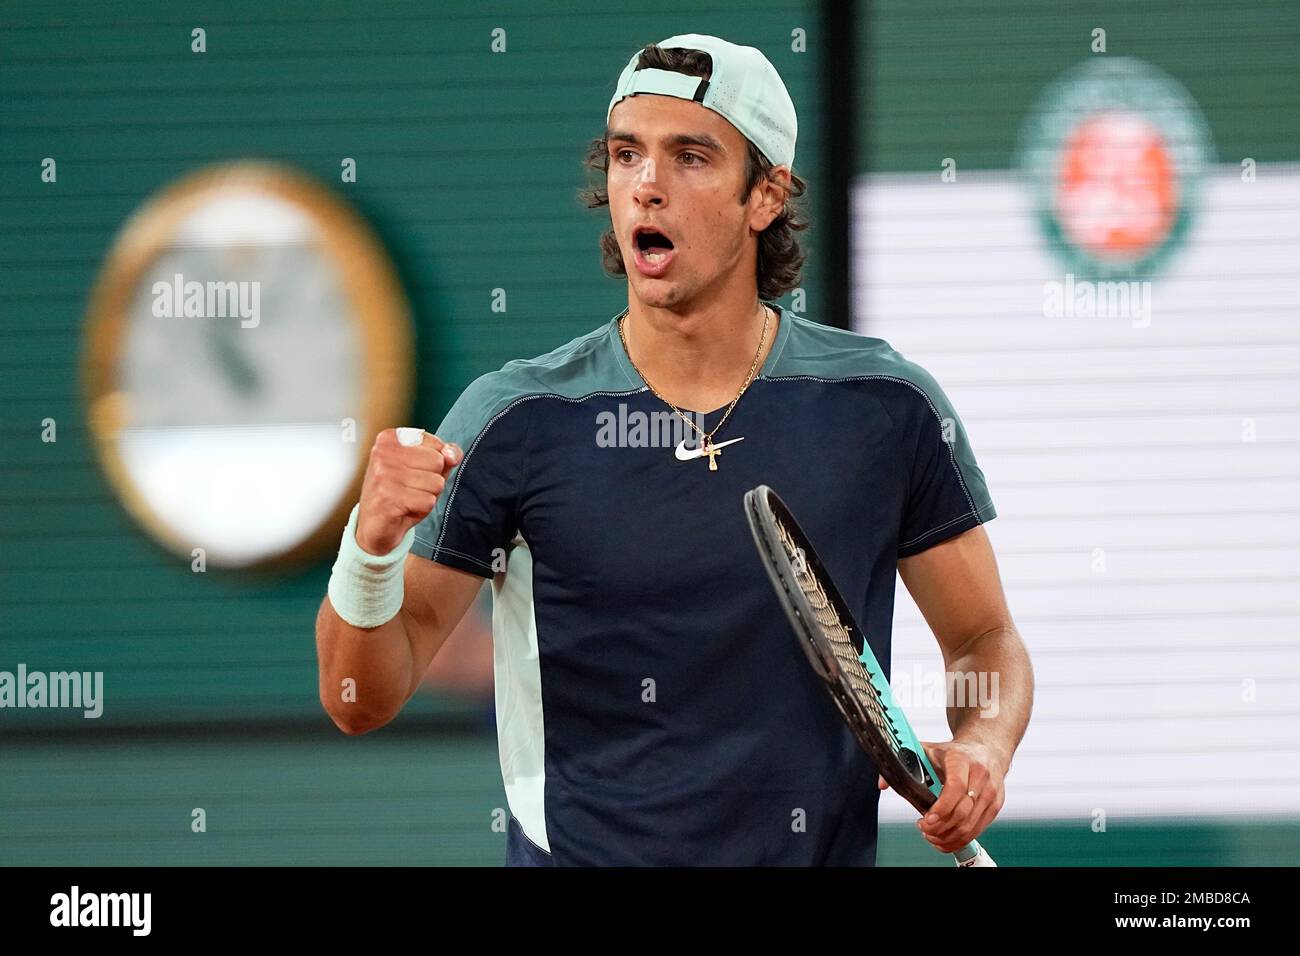 Italys Lorenzo Musetti celebrates winning a point as he plays Greeces Stefanos Tsitsipas during their first round match of the French Open tennis tournament at the Roland Garros stadium Tuesday, May 24,